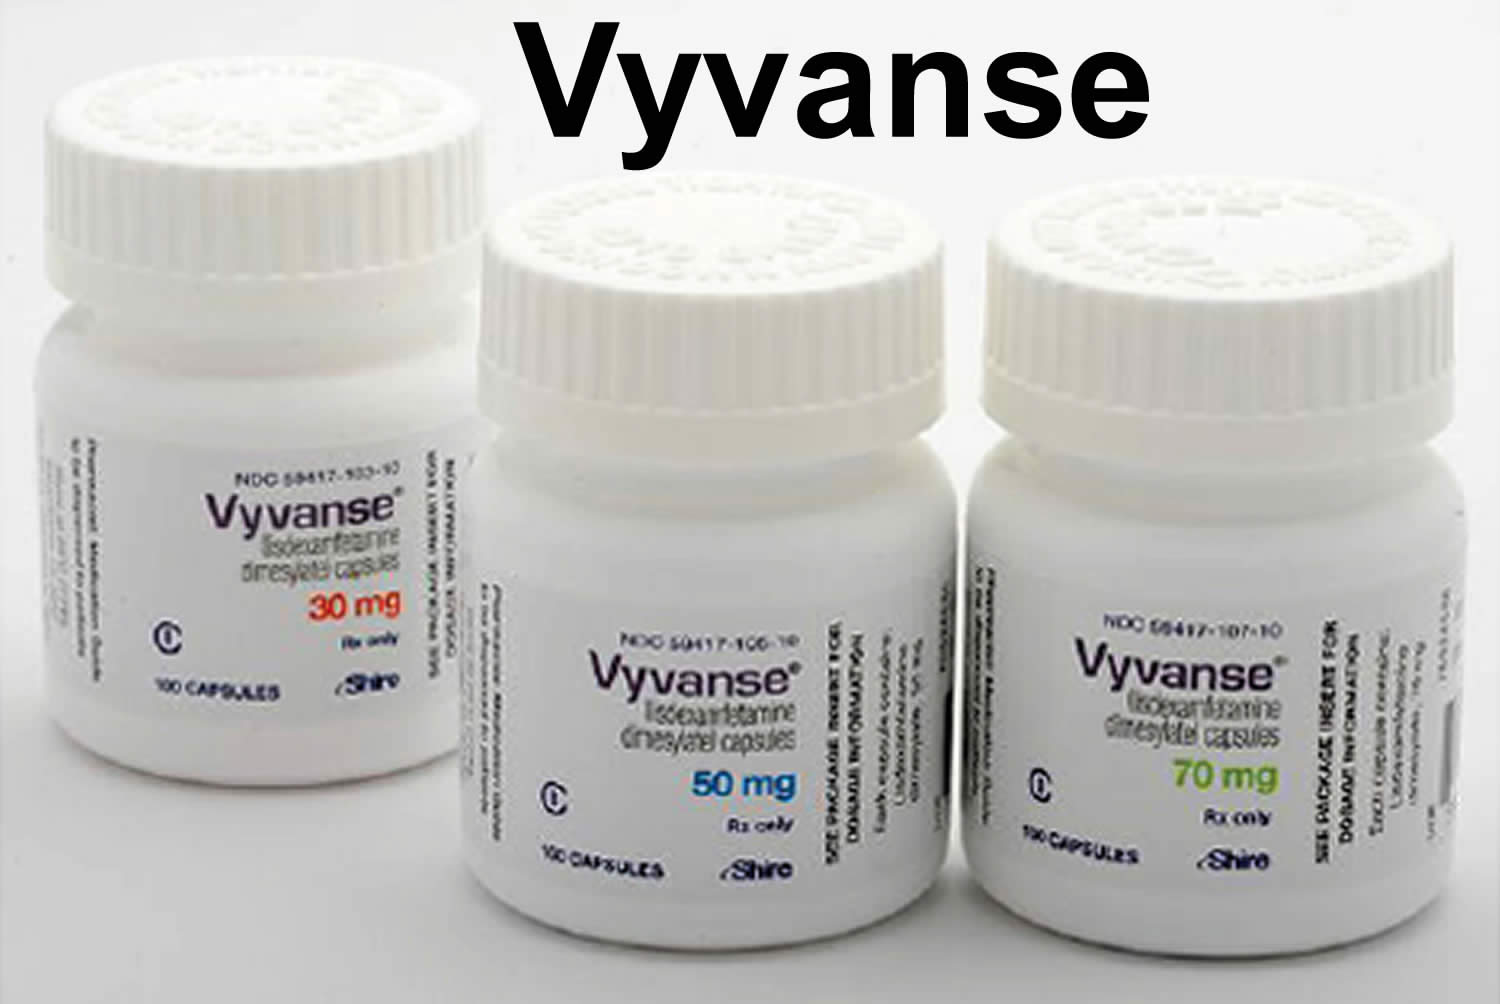 Vyvanse uses for ADHD & binge eating, vyvanse dosage and side effects